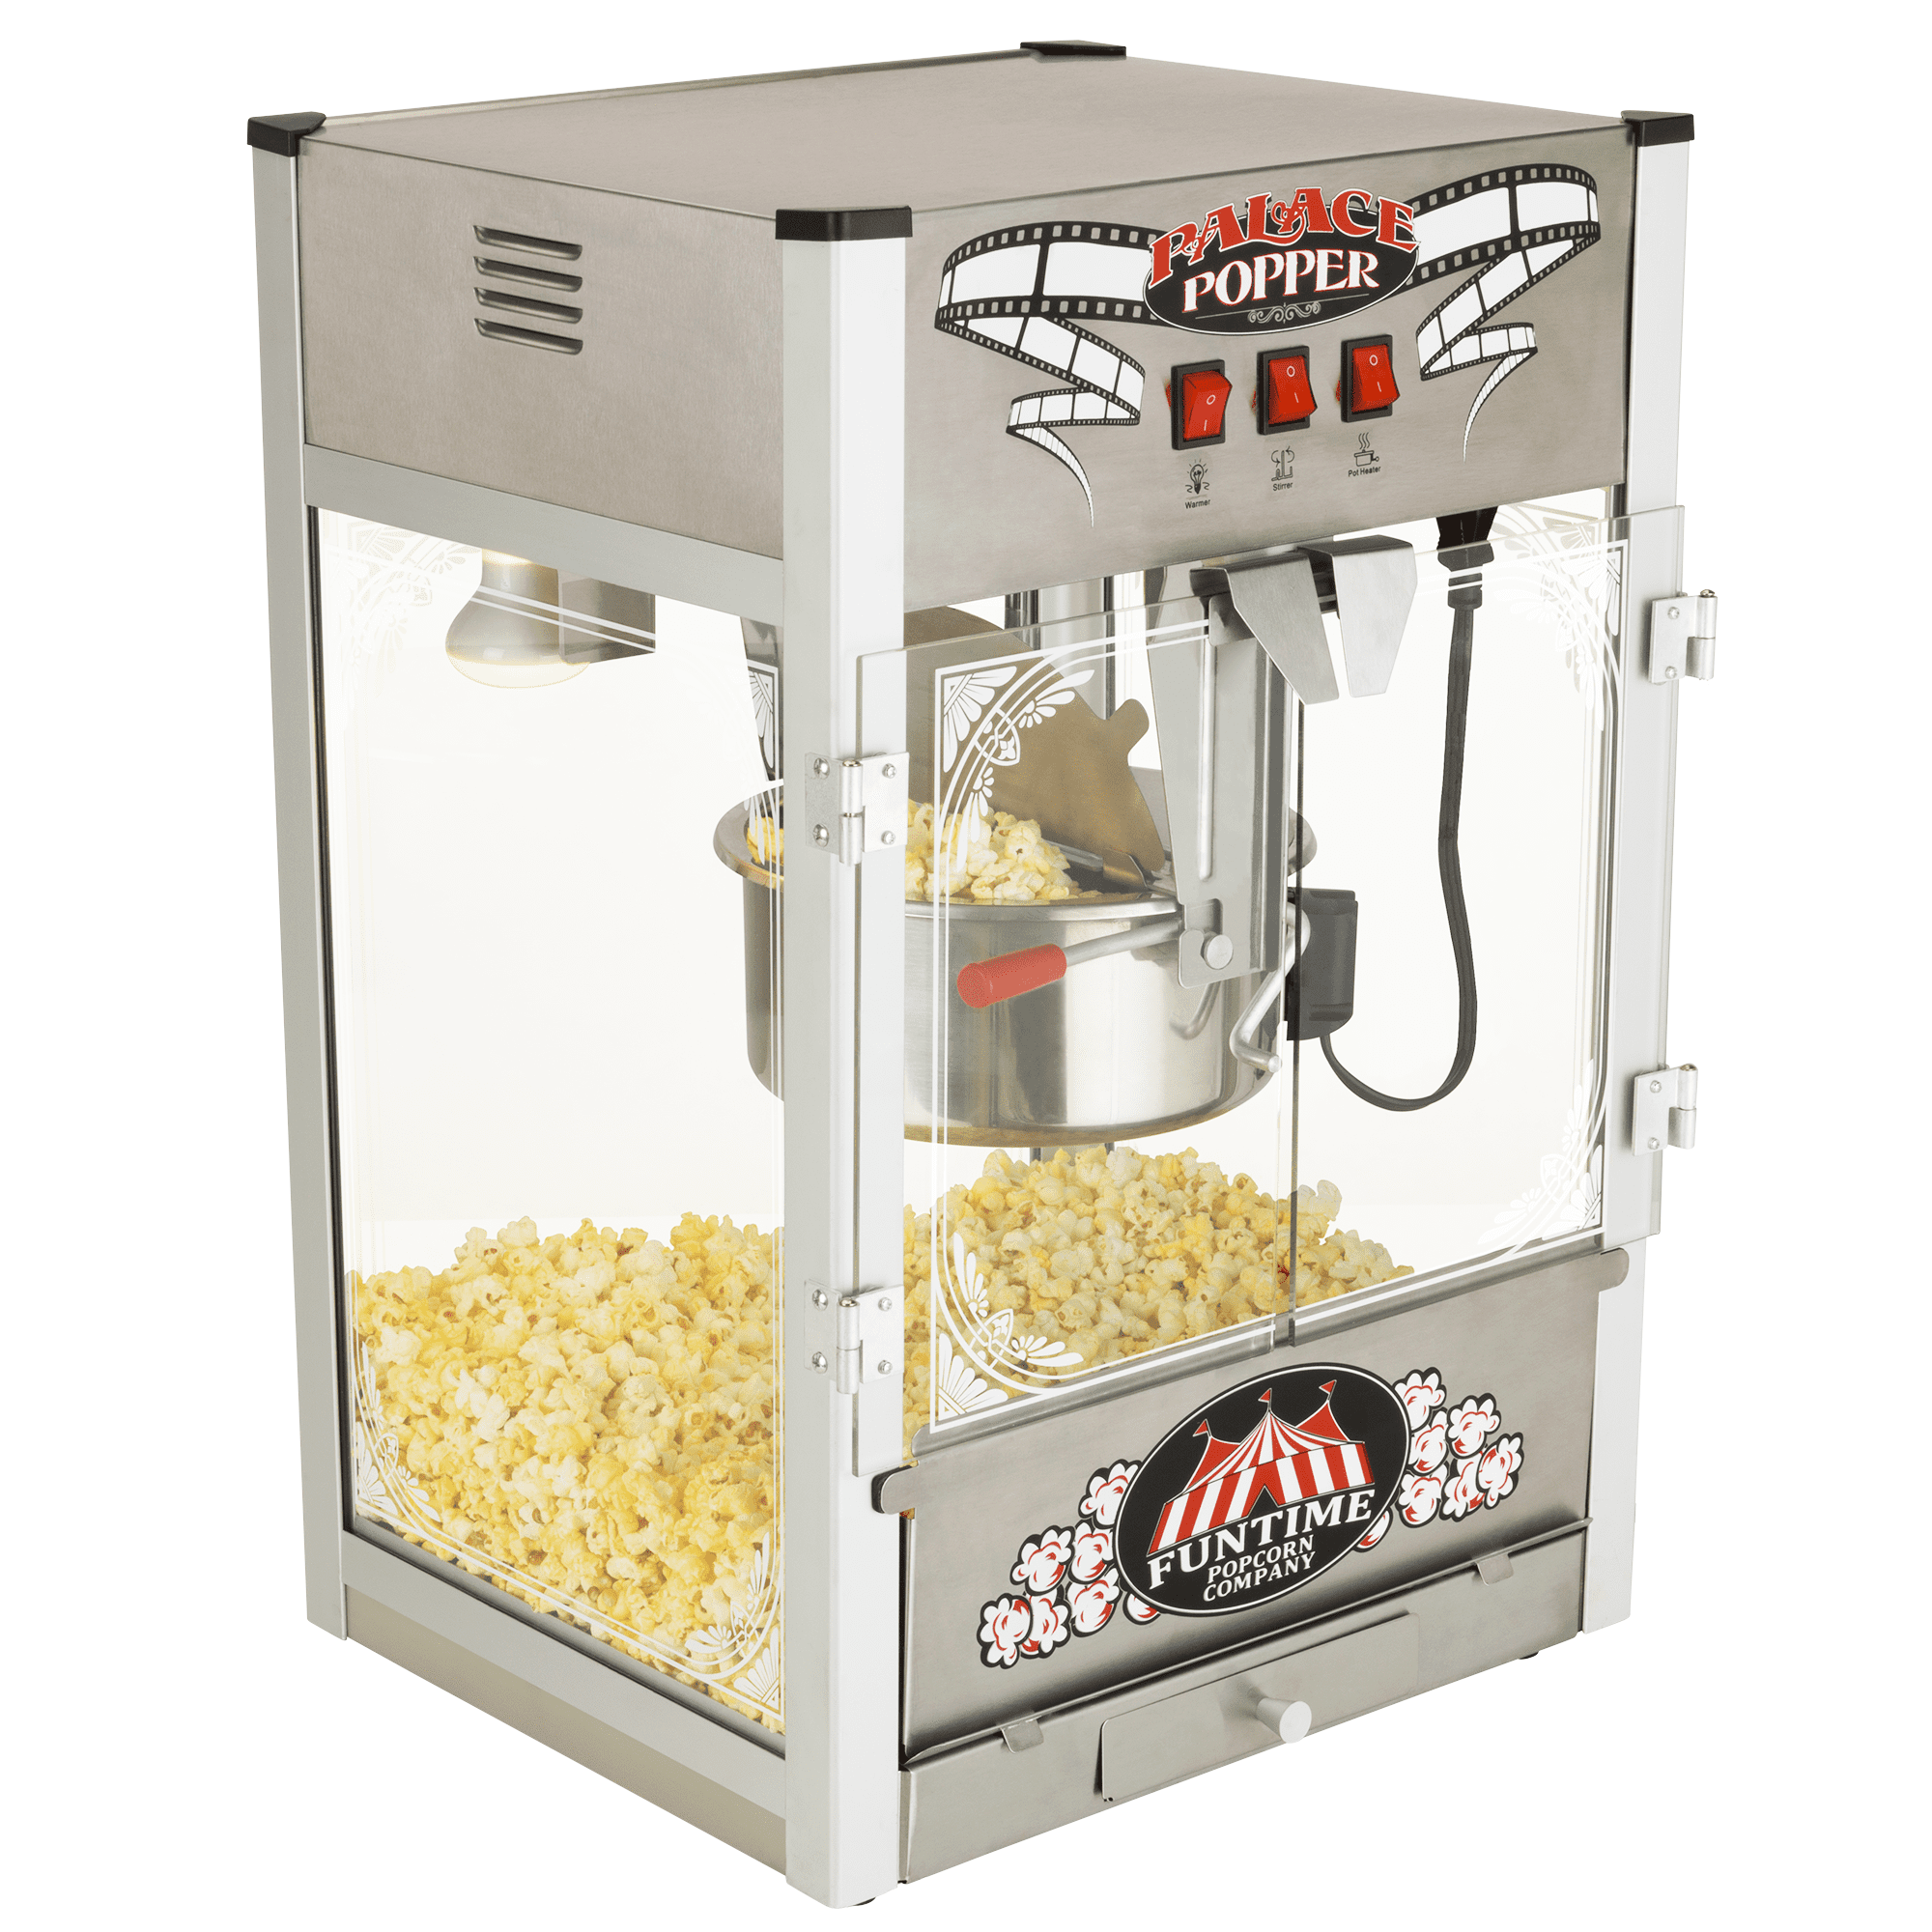  West Bend Stir Crazy Popcorn Machine Electric Hot Oil Popper  Includes Large Lid for Serving Bowl and Convenient Nesting Storage,  6-Quart, Red: Home & Kitchen